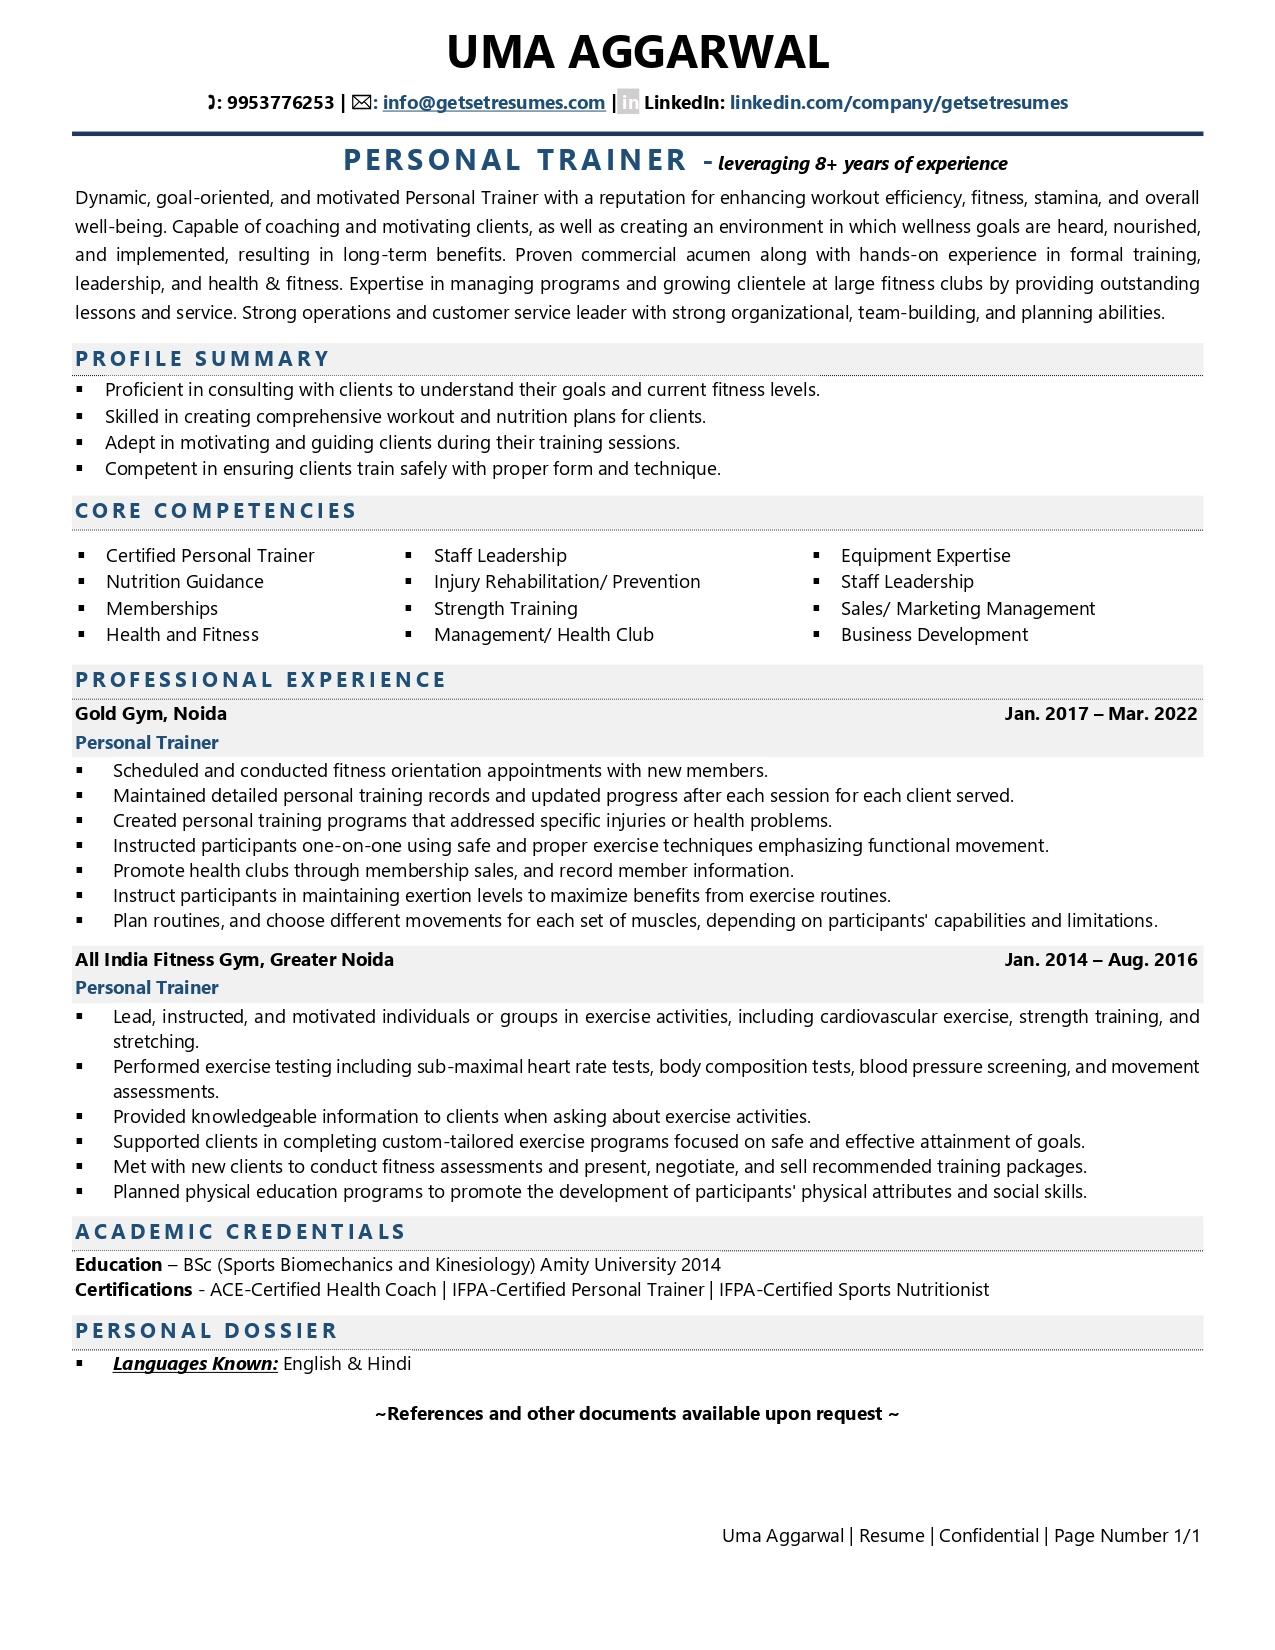 Personal Trainer - Resume Example & Template